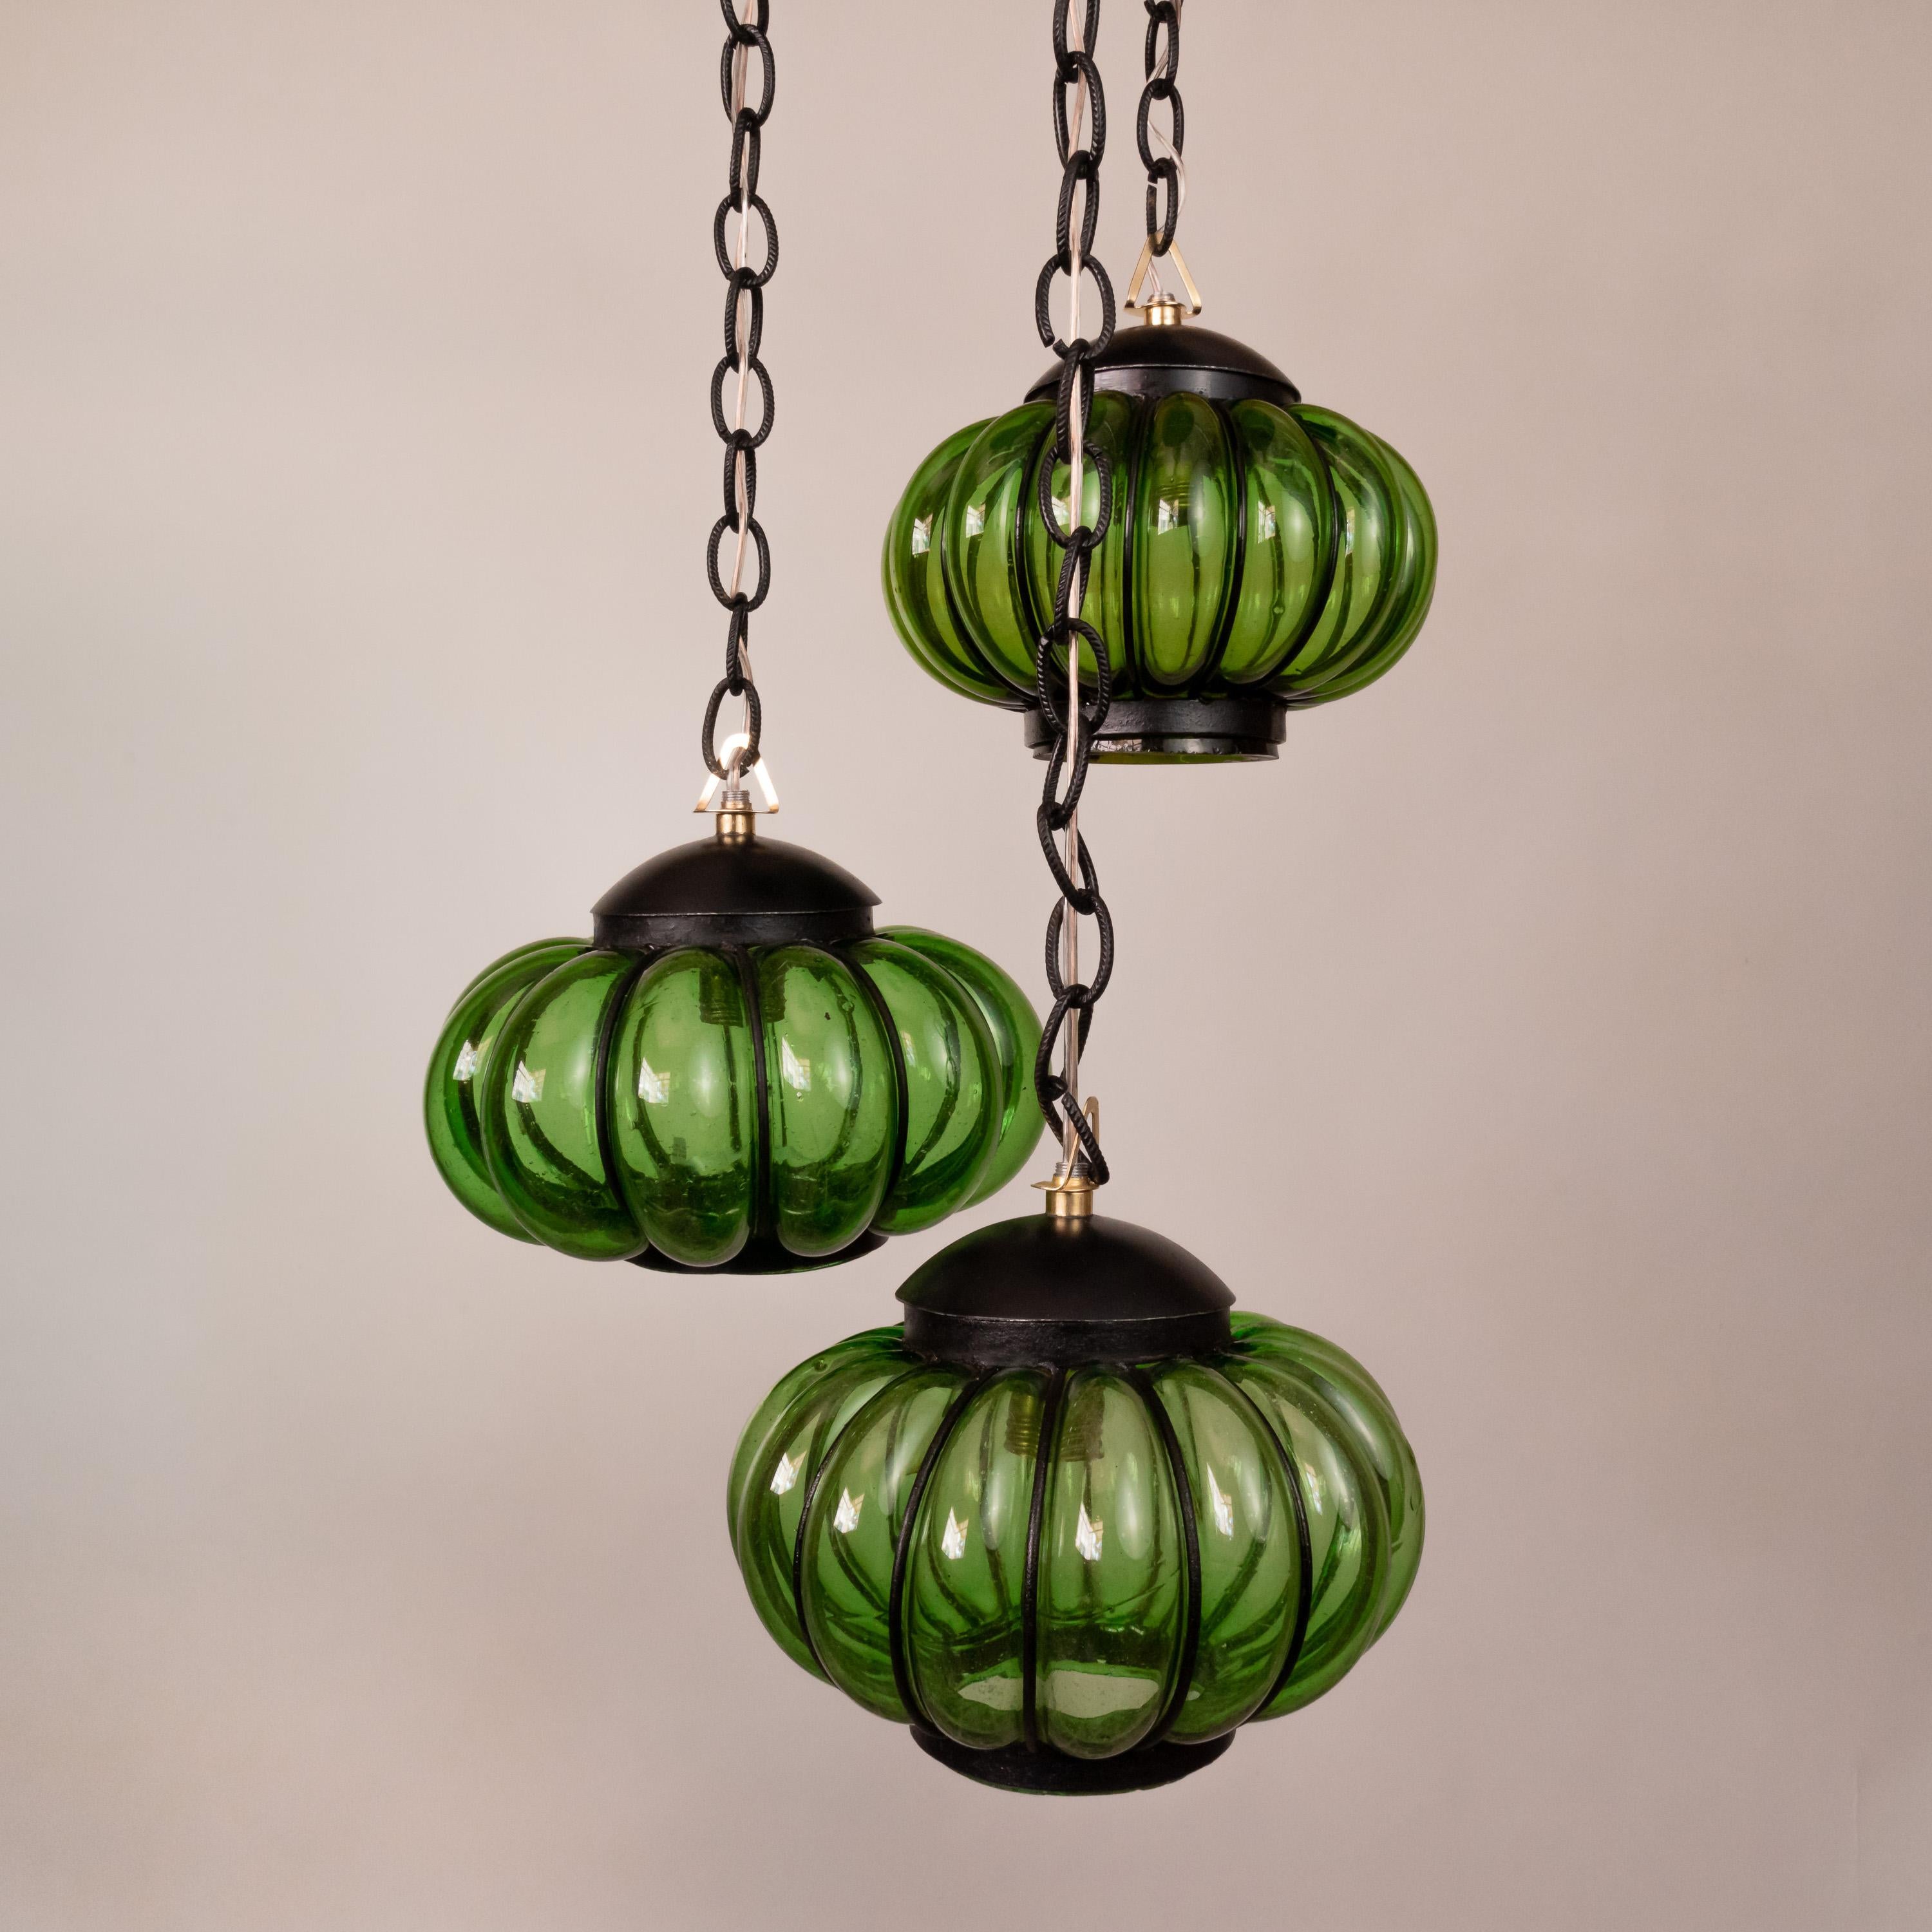 Beautiful chandelier assembled with three original Feders pumpkin-shaped shades of blown green glass trapped in wrought iron painted black. Each sphere hangs from a black chain and was set at a different height to create a visually appealing